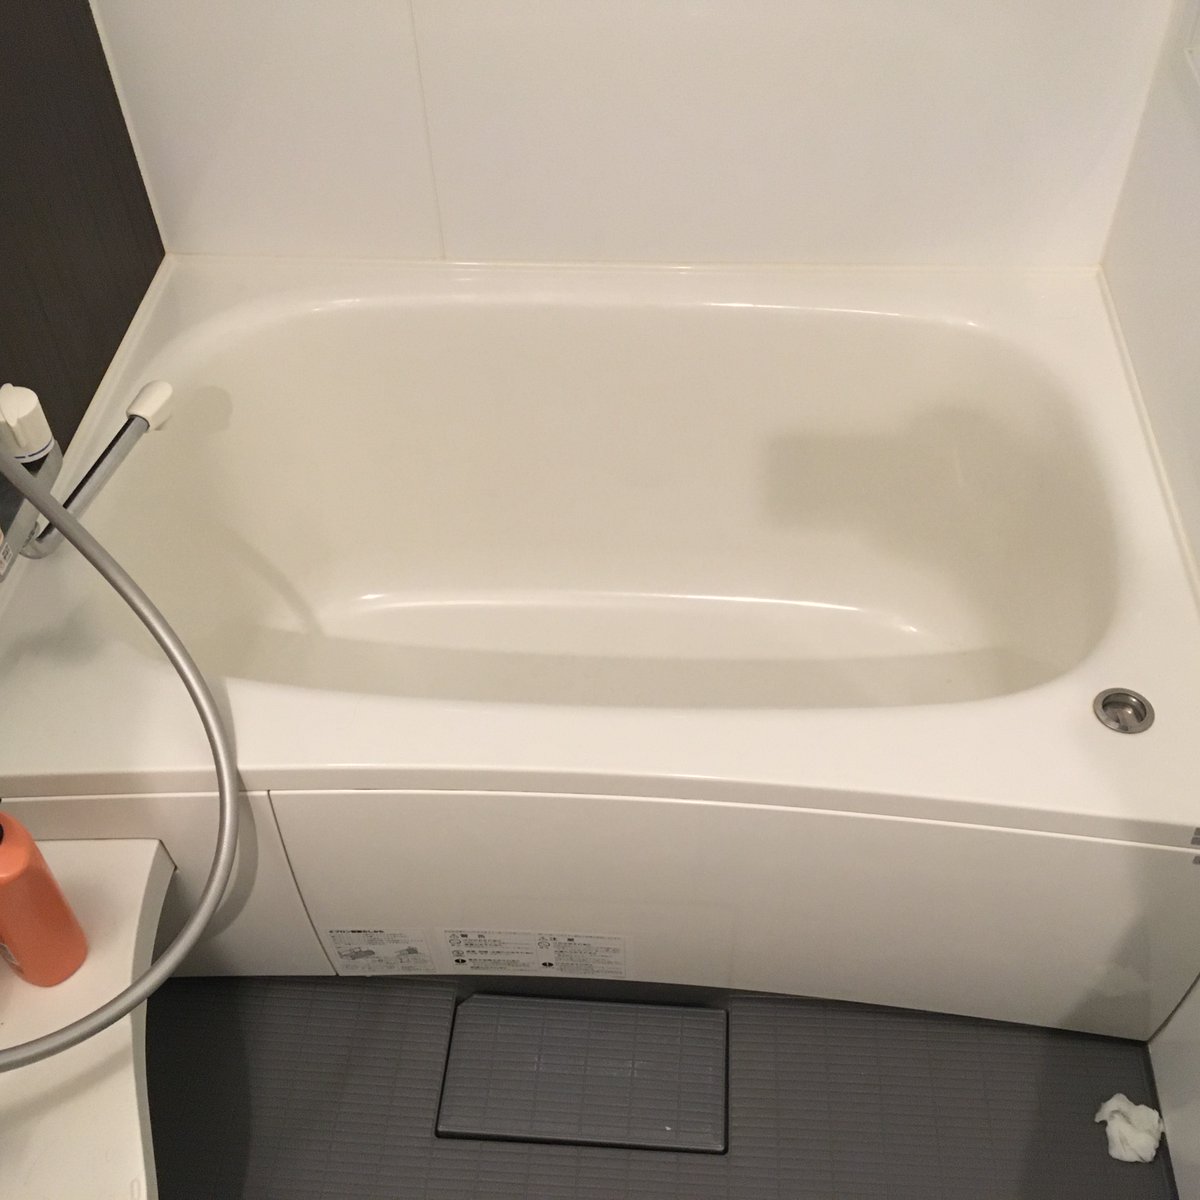 Dear bathtub Twitter: this is my tub in Japan. It is very deep and you can fill it to the top. If it overflows, the floor drain catches it. Why does every American tub have a killjoy drain 3/4 of the way up, so you can never properly immerse yourself? Is there some law in play?